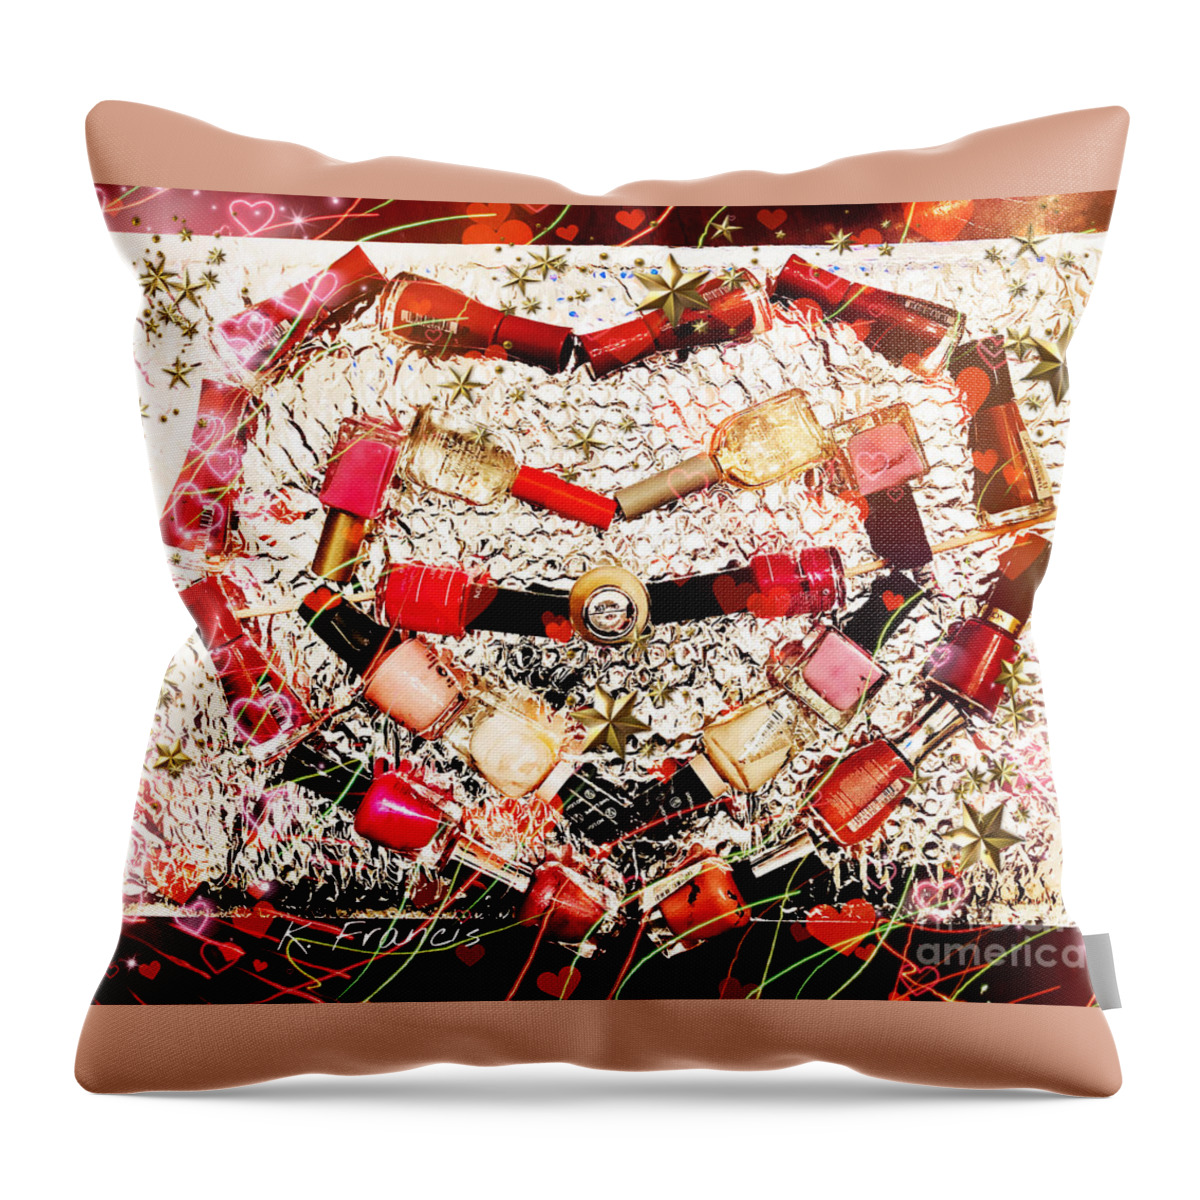 A Brush With Love Throw Pillow featuring the digital art A Brush with Love by Karen Francis